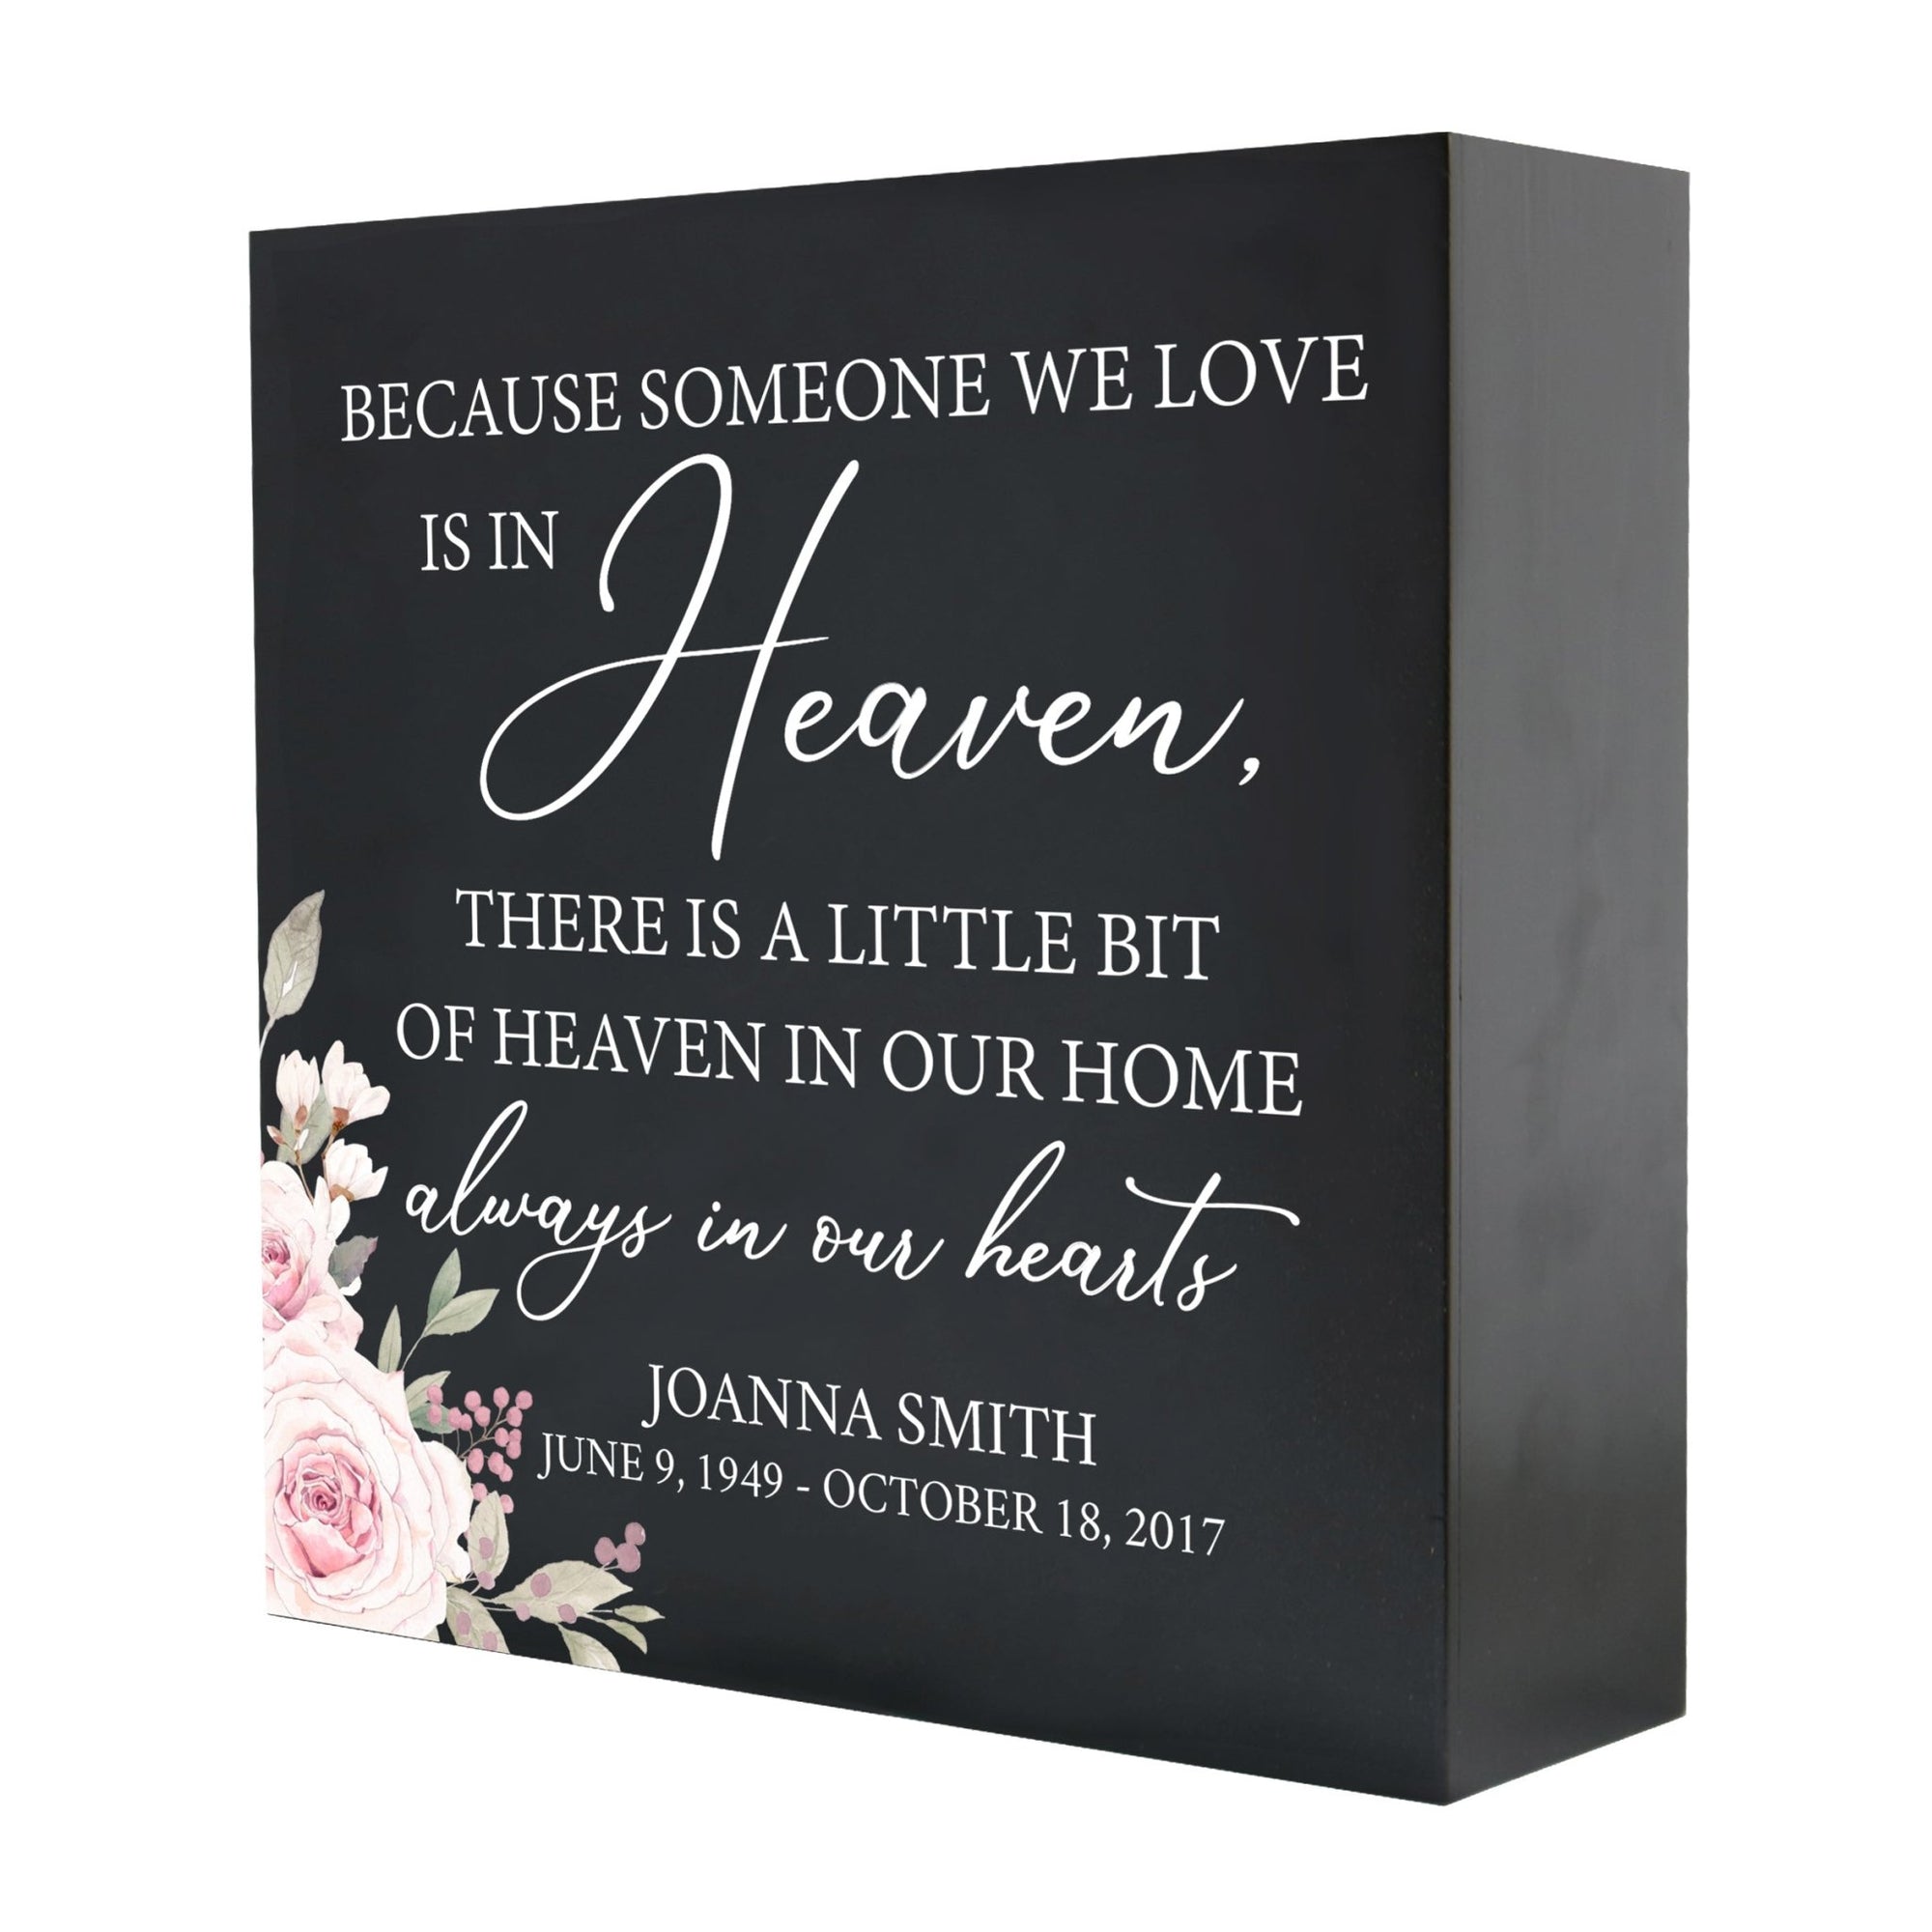 Personalized Modern Inspirational Memorial Wooden Shadow Box and Urn 10x10 holds 189 cu in of Human Ashes - Because Someone We Love (Black) - LifeSong Milestones